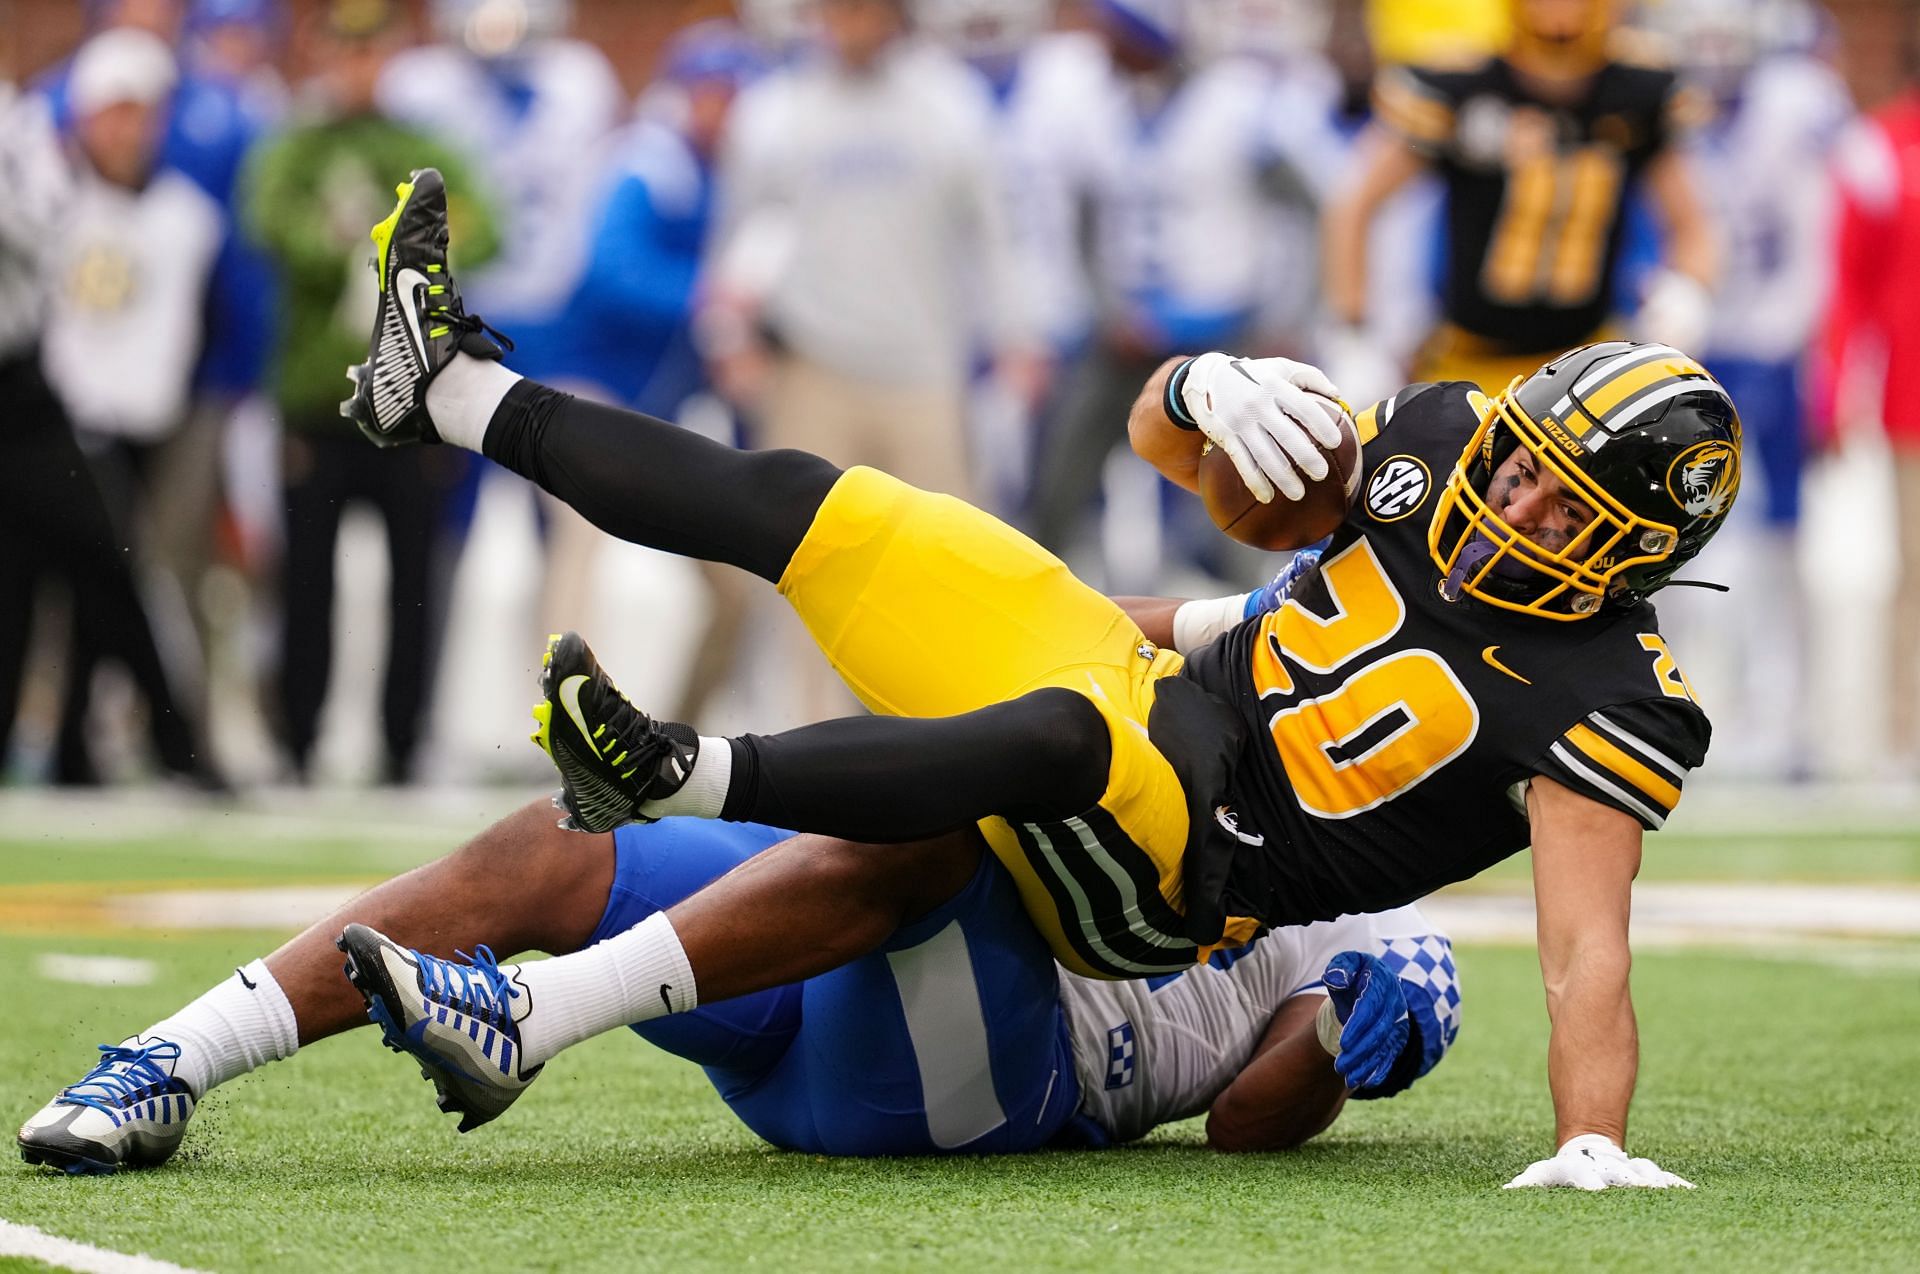 Cody Schrader #20 of the Missouri Tigers is tackled by Trevin Wallace #32 of the Kentucky Wildcats